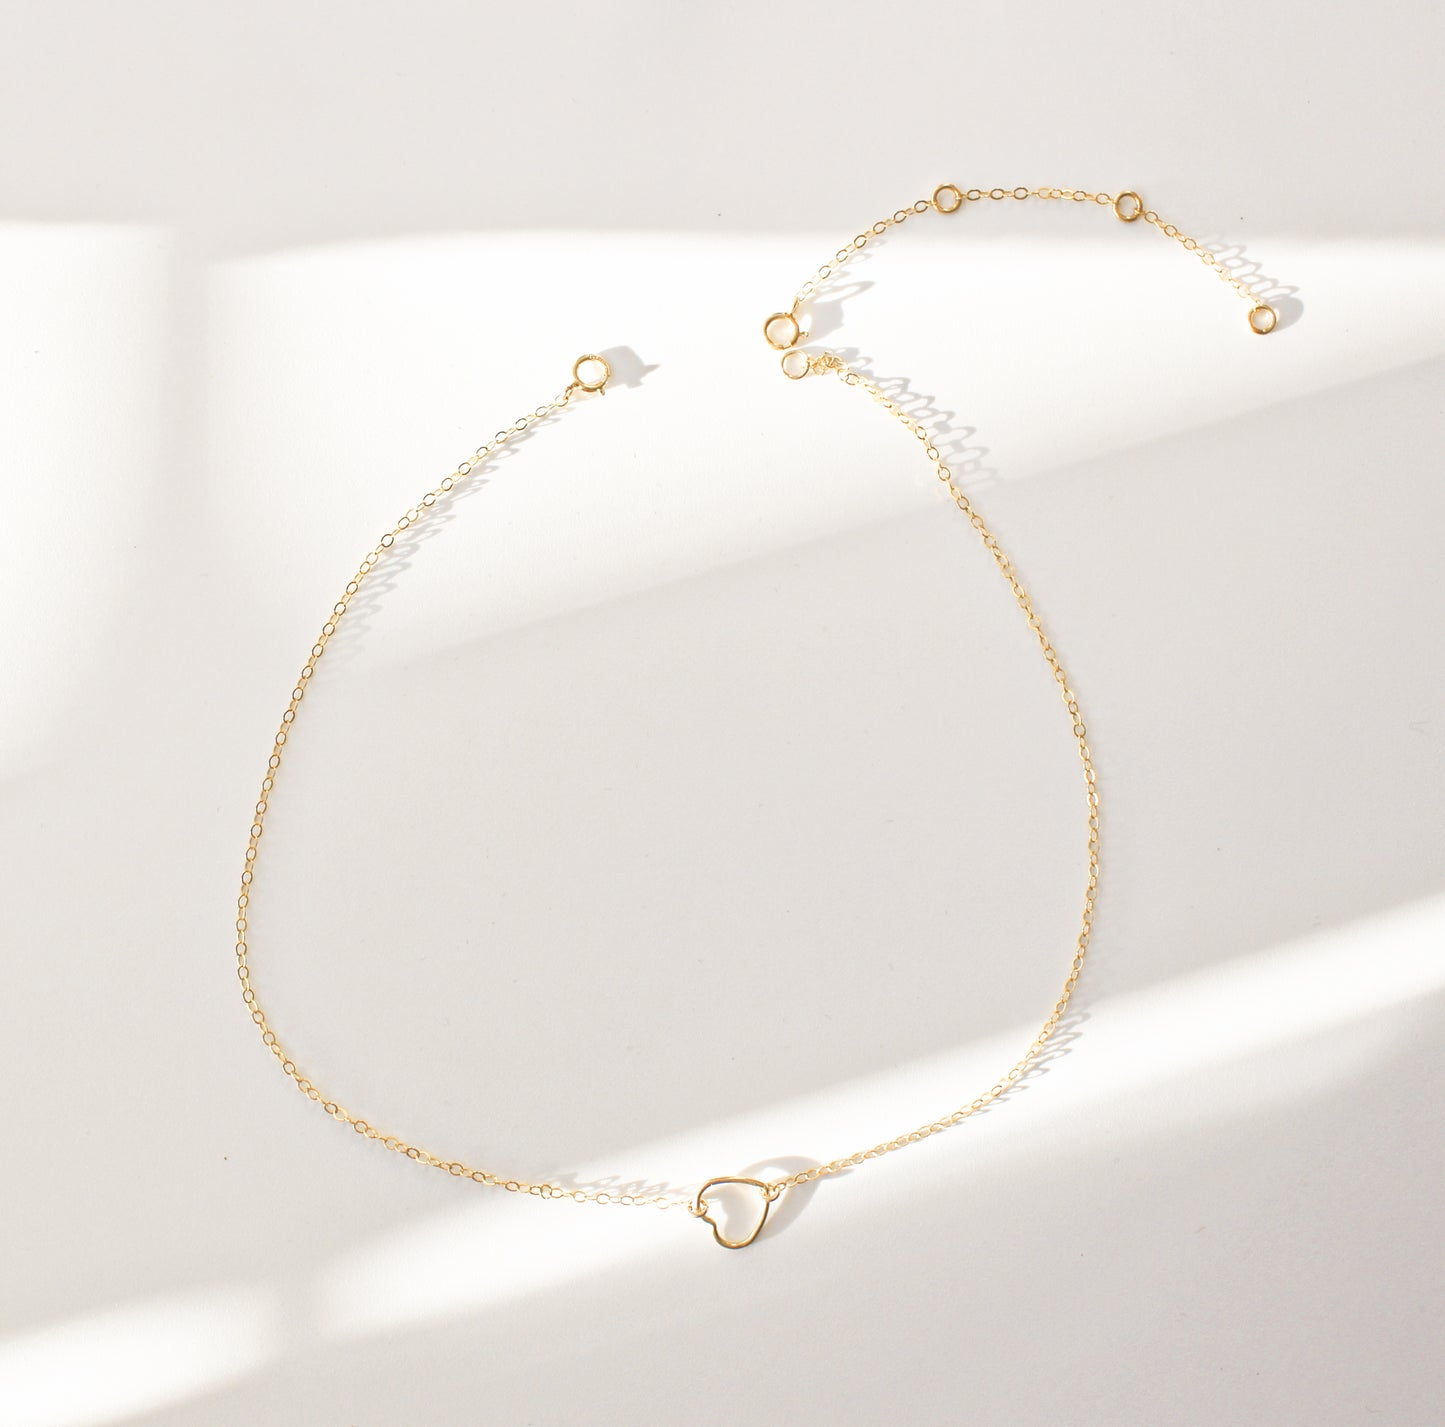 Fine 14k gold filled heart wire necklace ∙ Gold fill heart choker ∙ Gift bridesmaid sister friend ∙ Gold filled